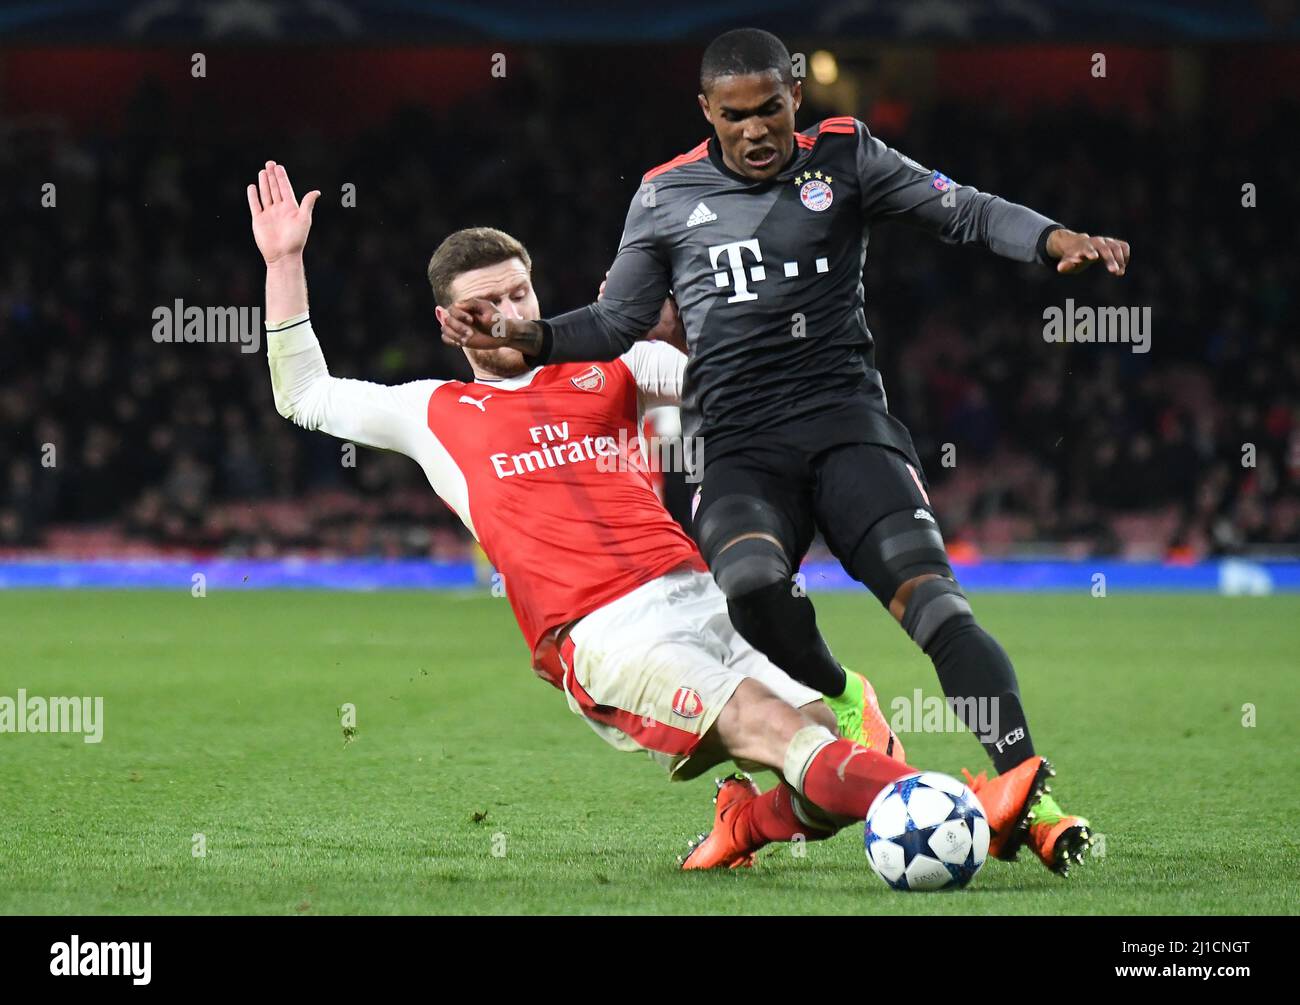 LONDON, ENGLAND - MARCH 7, 2017: Shkodran Mustafi (L) of Arsenal and Arturo Vidal (R) of Bayern pictured in action during the second leg of the UEFA Champions League Round of 16 game between Arsenal FC and Bayern Munchen at Emirates Stadium. Copyright: Cosmin Iftode/Picstaff Stock Photo